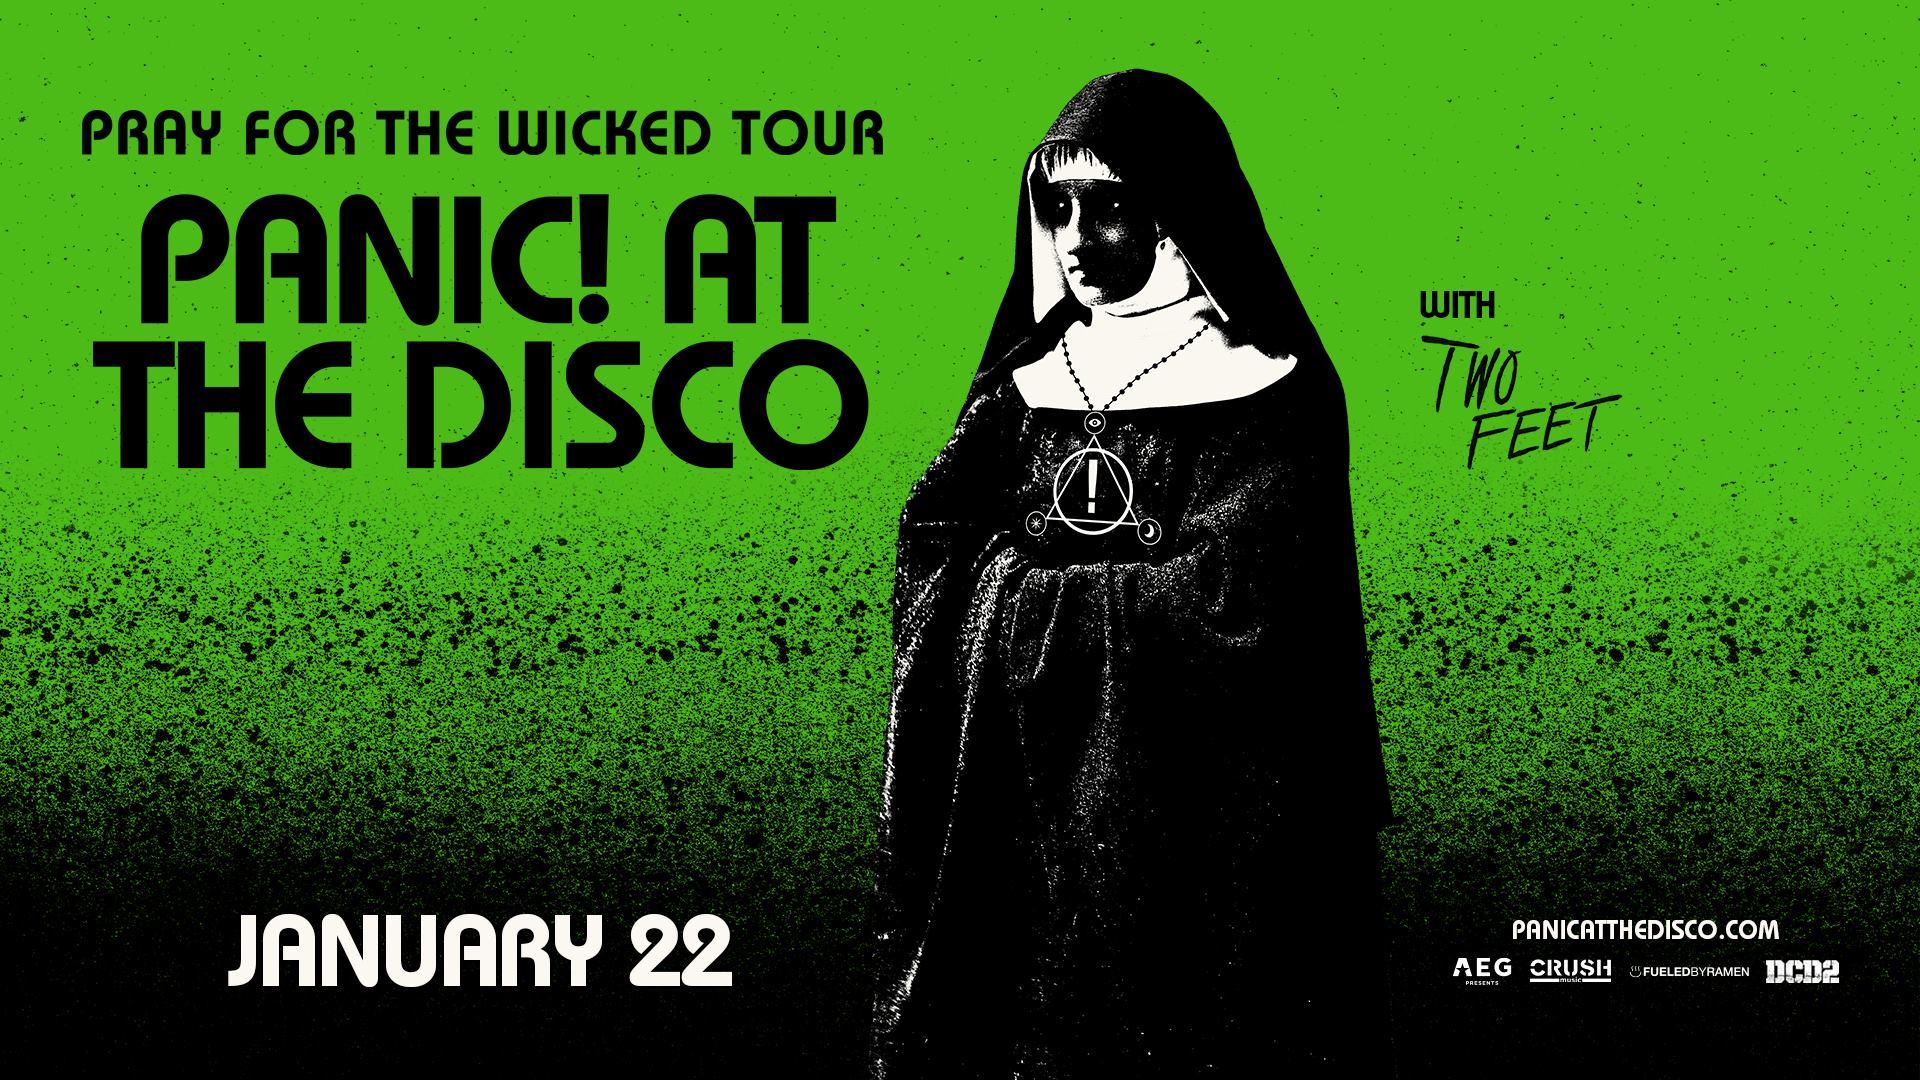 Pray for the Wicked Tour Panic at the Disco!